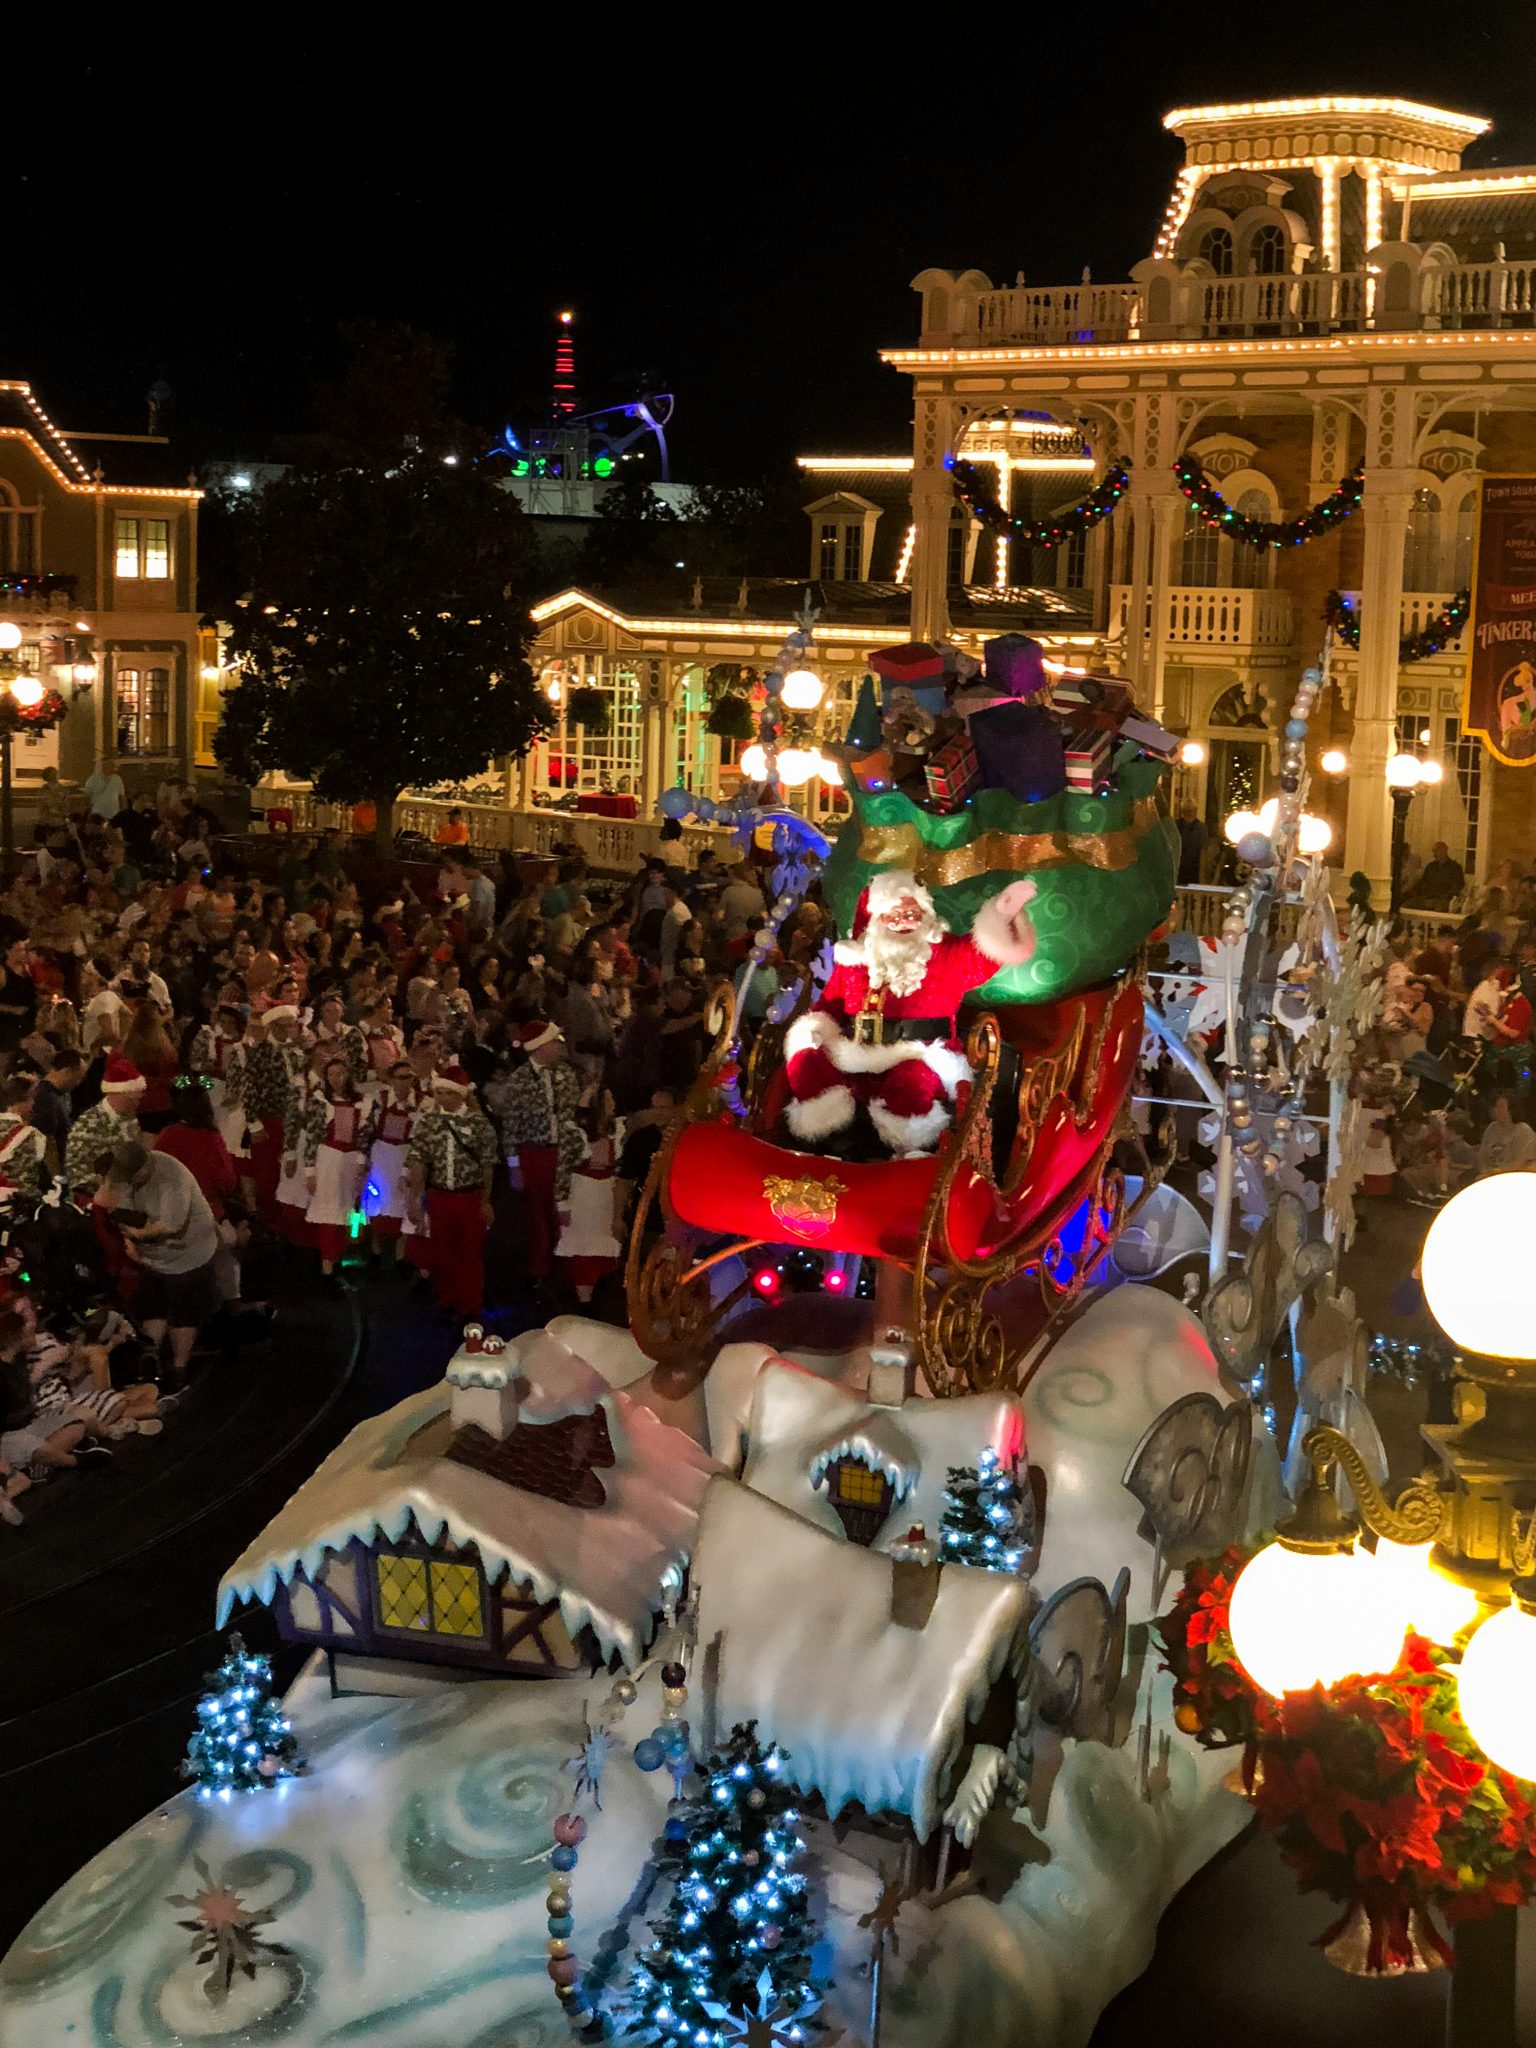 From Christmas trees to snow on Main Street, from free hot cocoa and cookies to fireworks the holidays at Walt Disney World are full of magic, lights, and the best family memories. You won't want to miss these 15 Ways to Celebrate the Holidays at Walt Disney World.